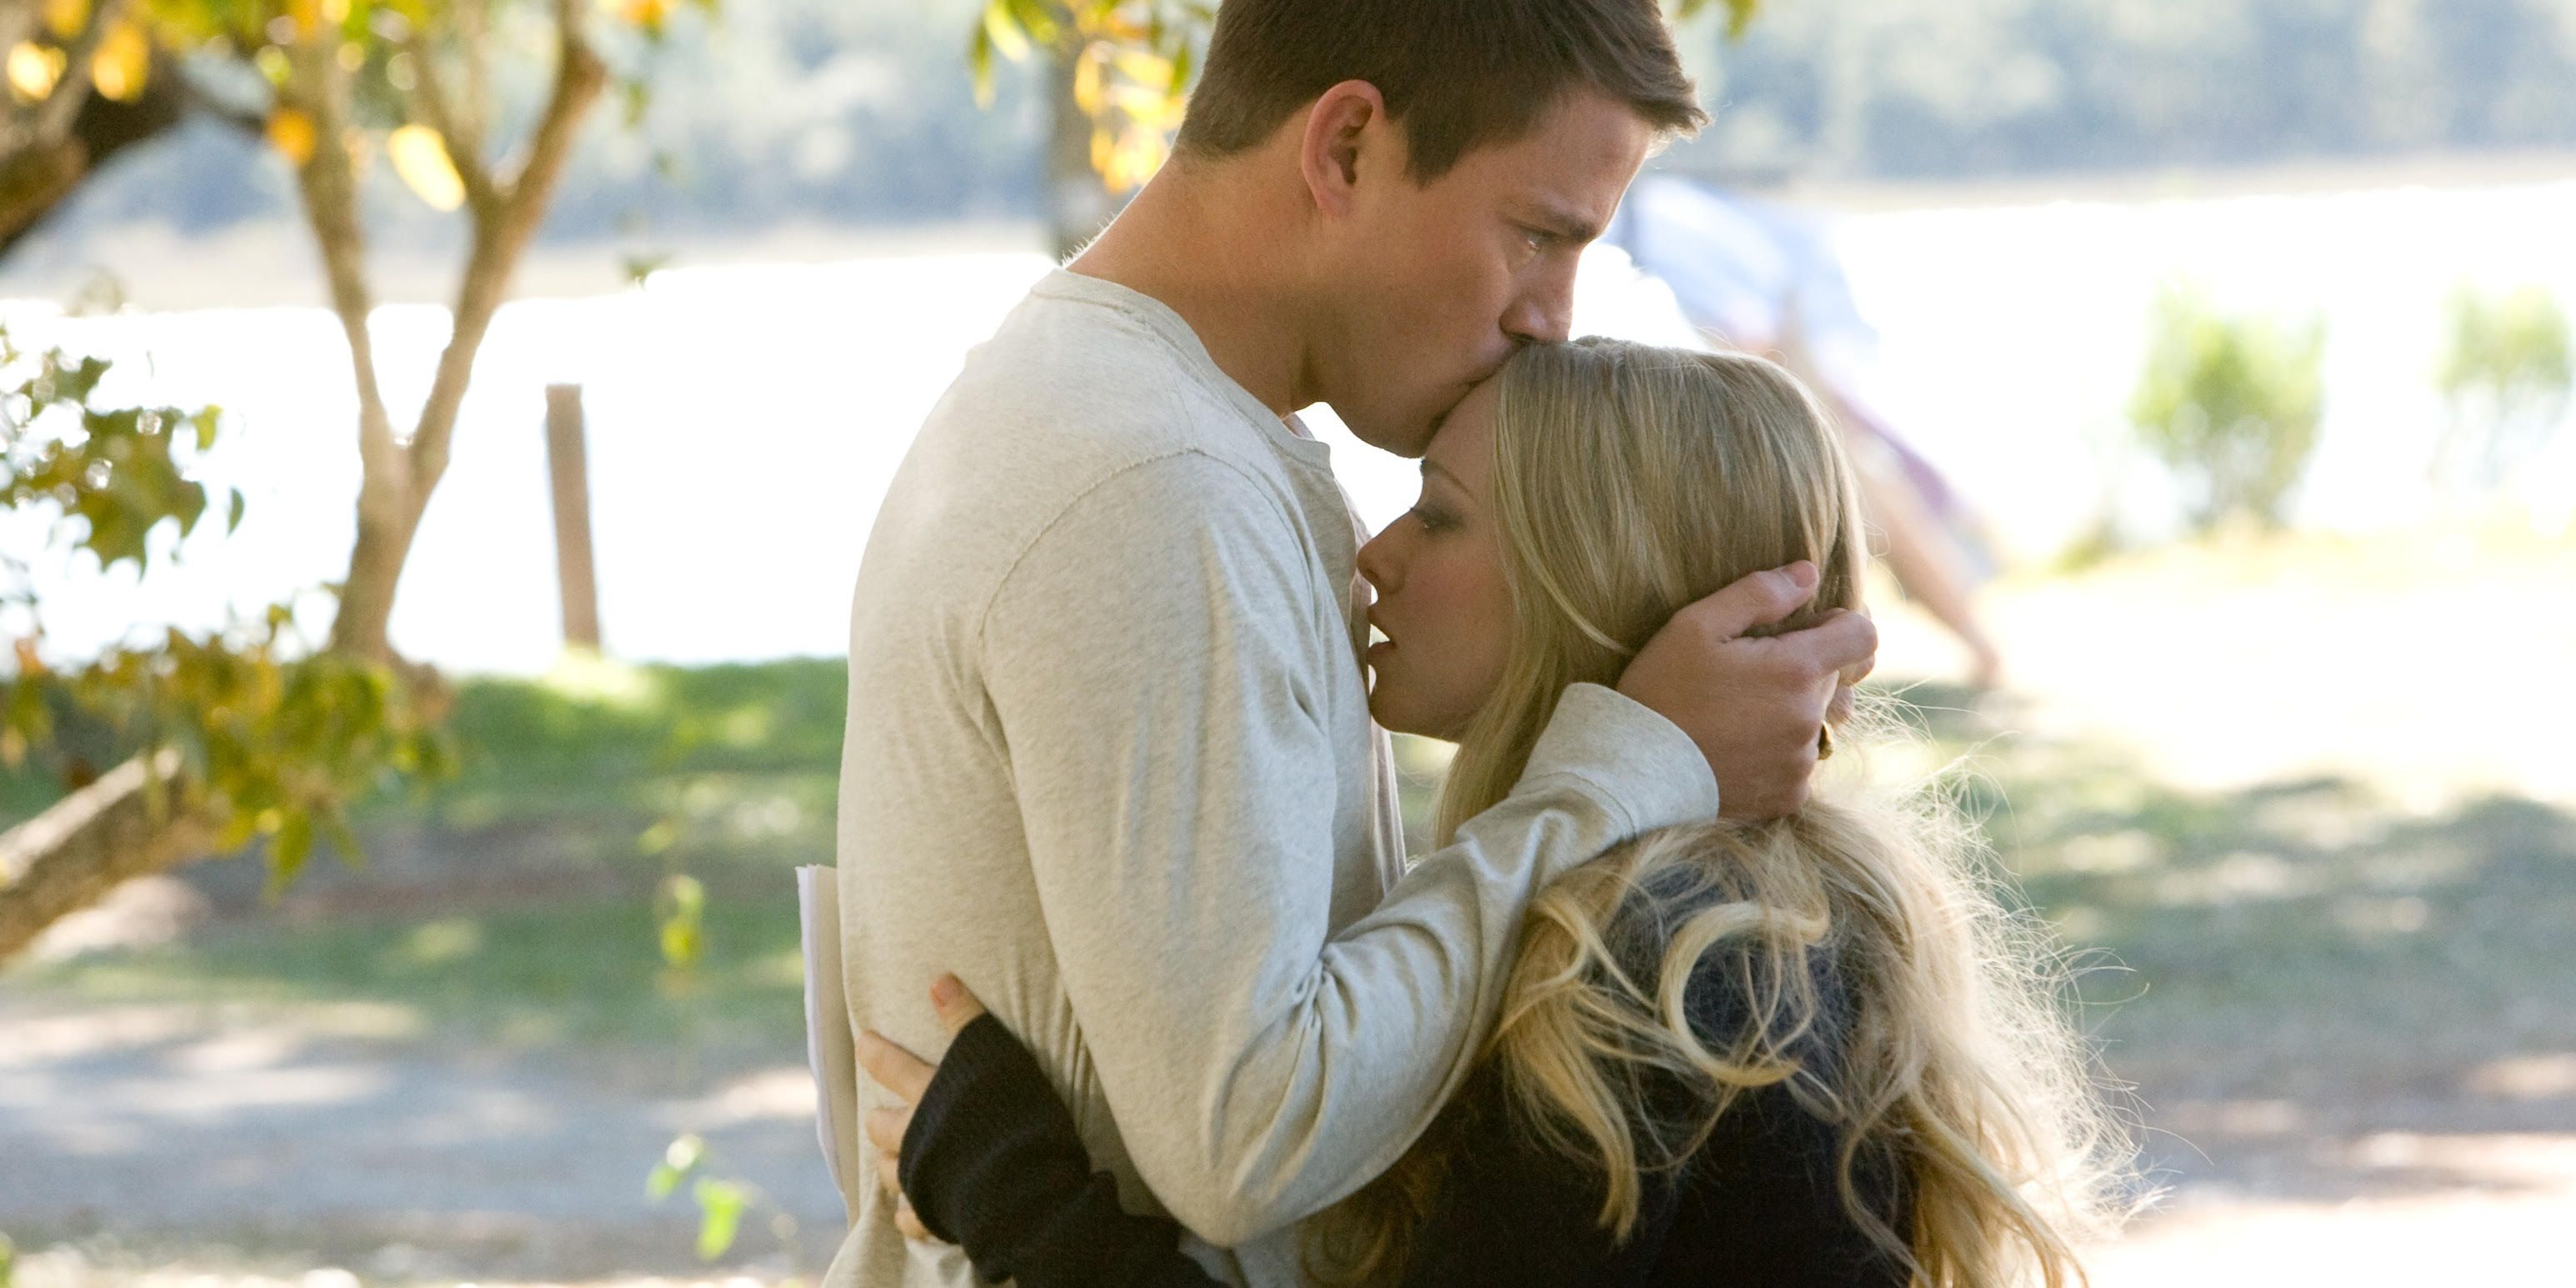 Best Nicholas Sparks Romance Films Ranked (According To Rotten Tomatoes)